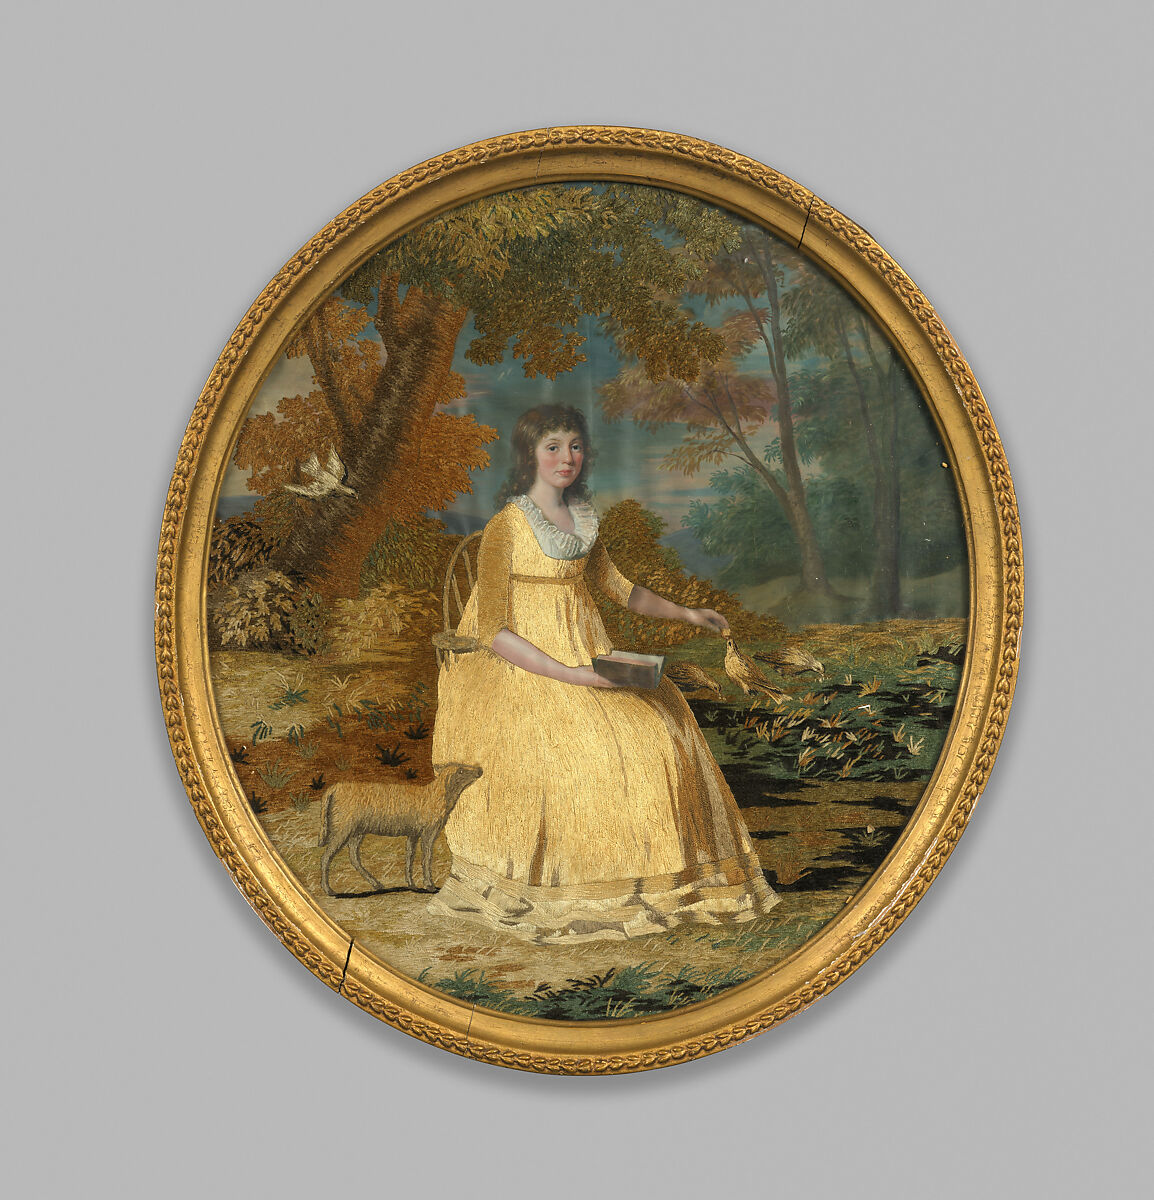 Embroidered picture, Silk, chenille, paint on linen (?), British 